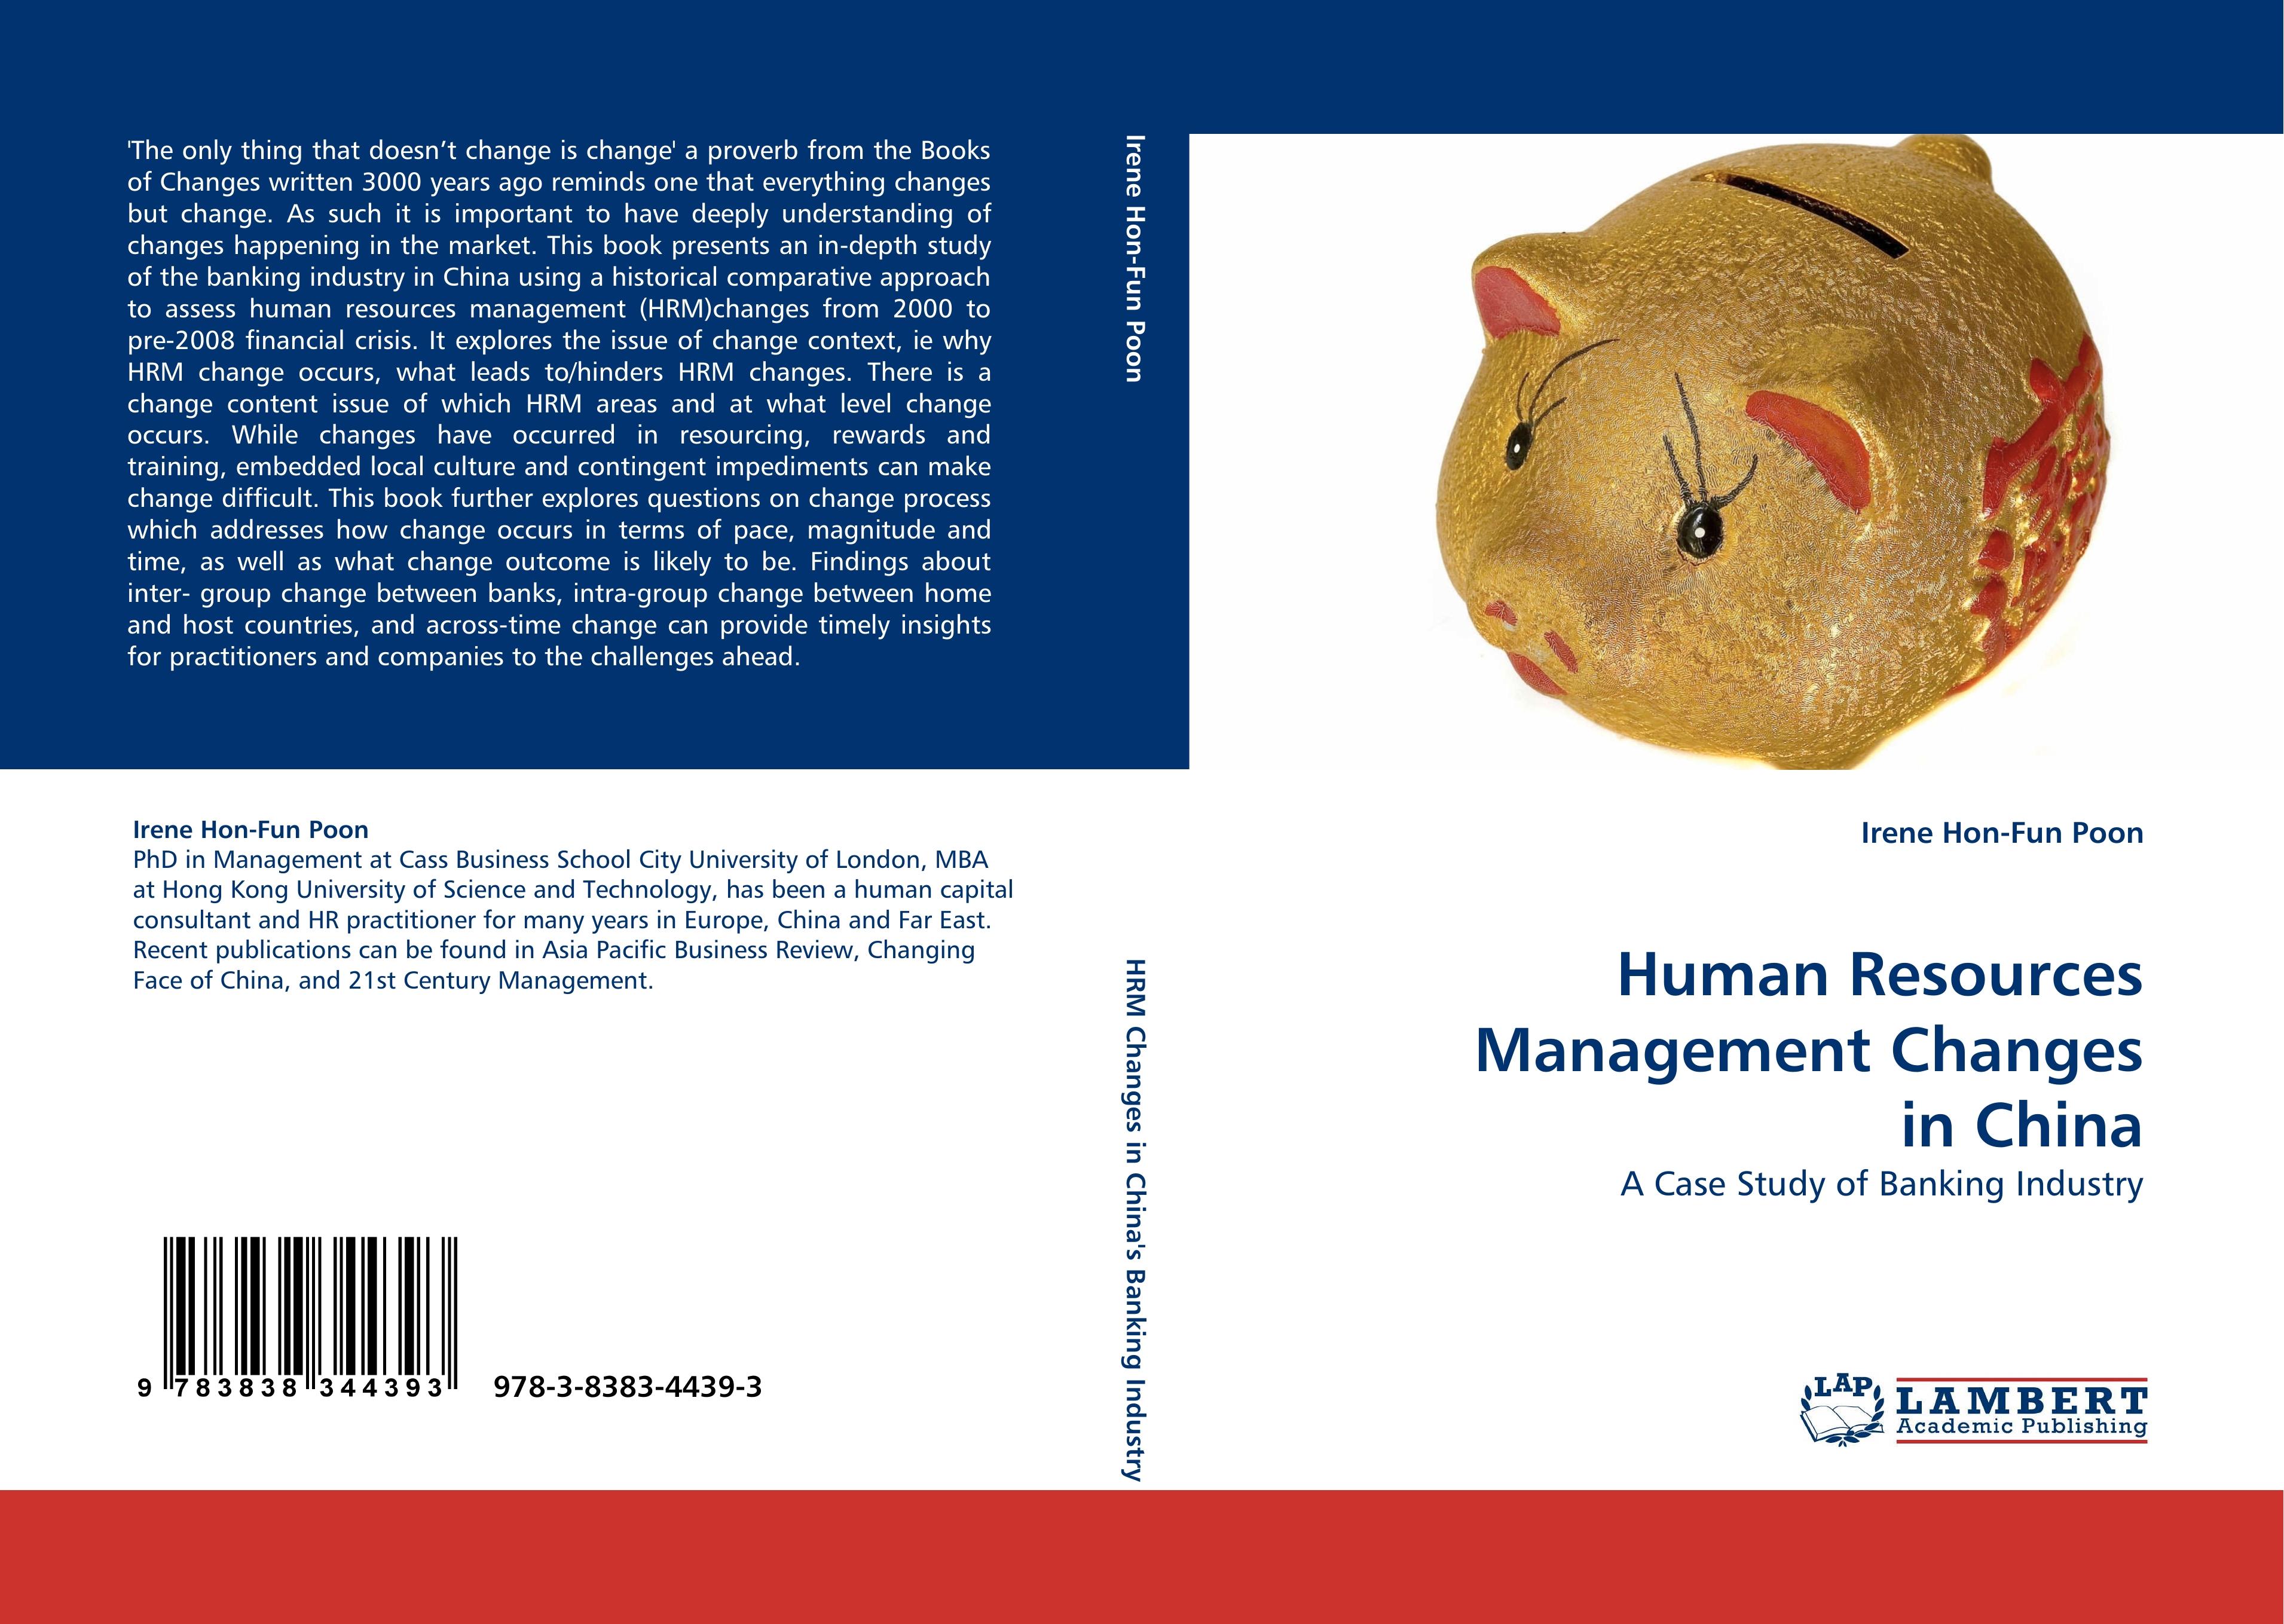 Human Resources Management Changes in China / A Case Study of Banking Industry / Irene Hon-Fun Poon / Taschenbuch / Paperback / 224 S. / Englisch / 2010 / LAP LAMBERT Academic Publishing - Poon, Irene Hon-Fun